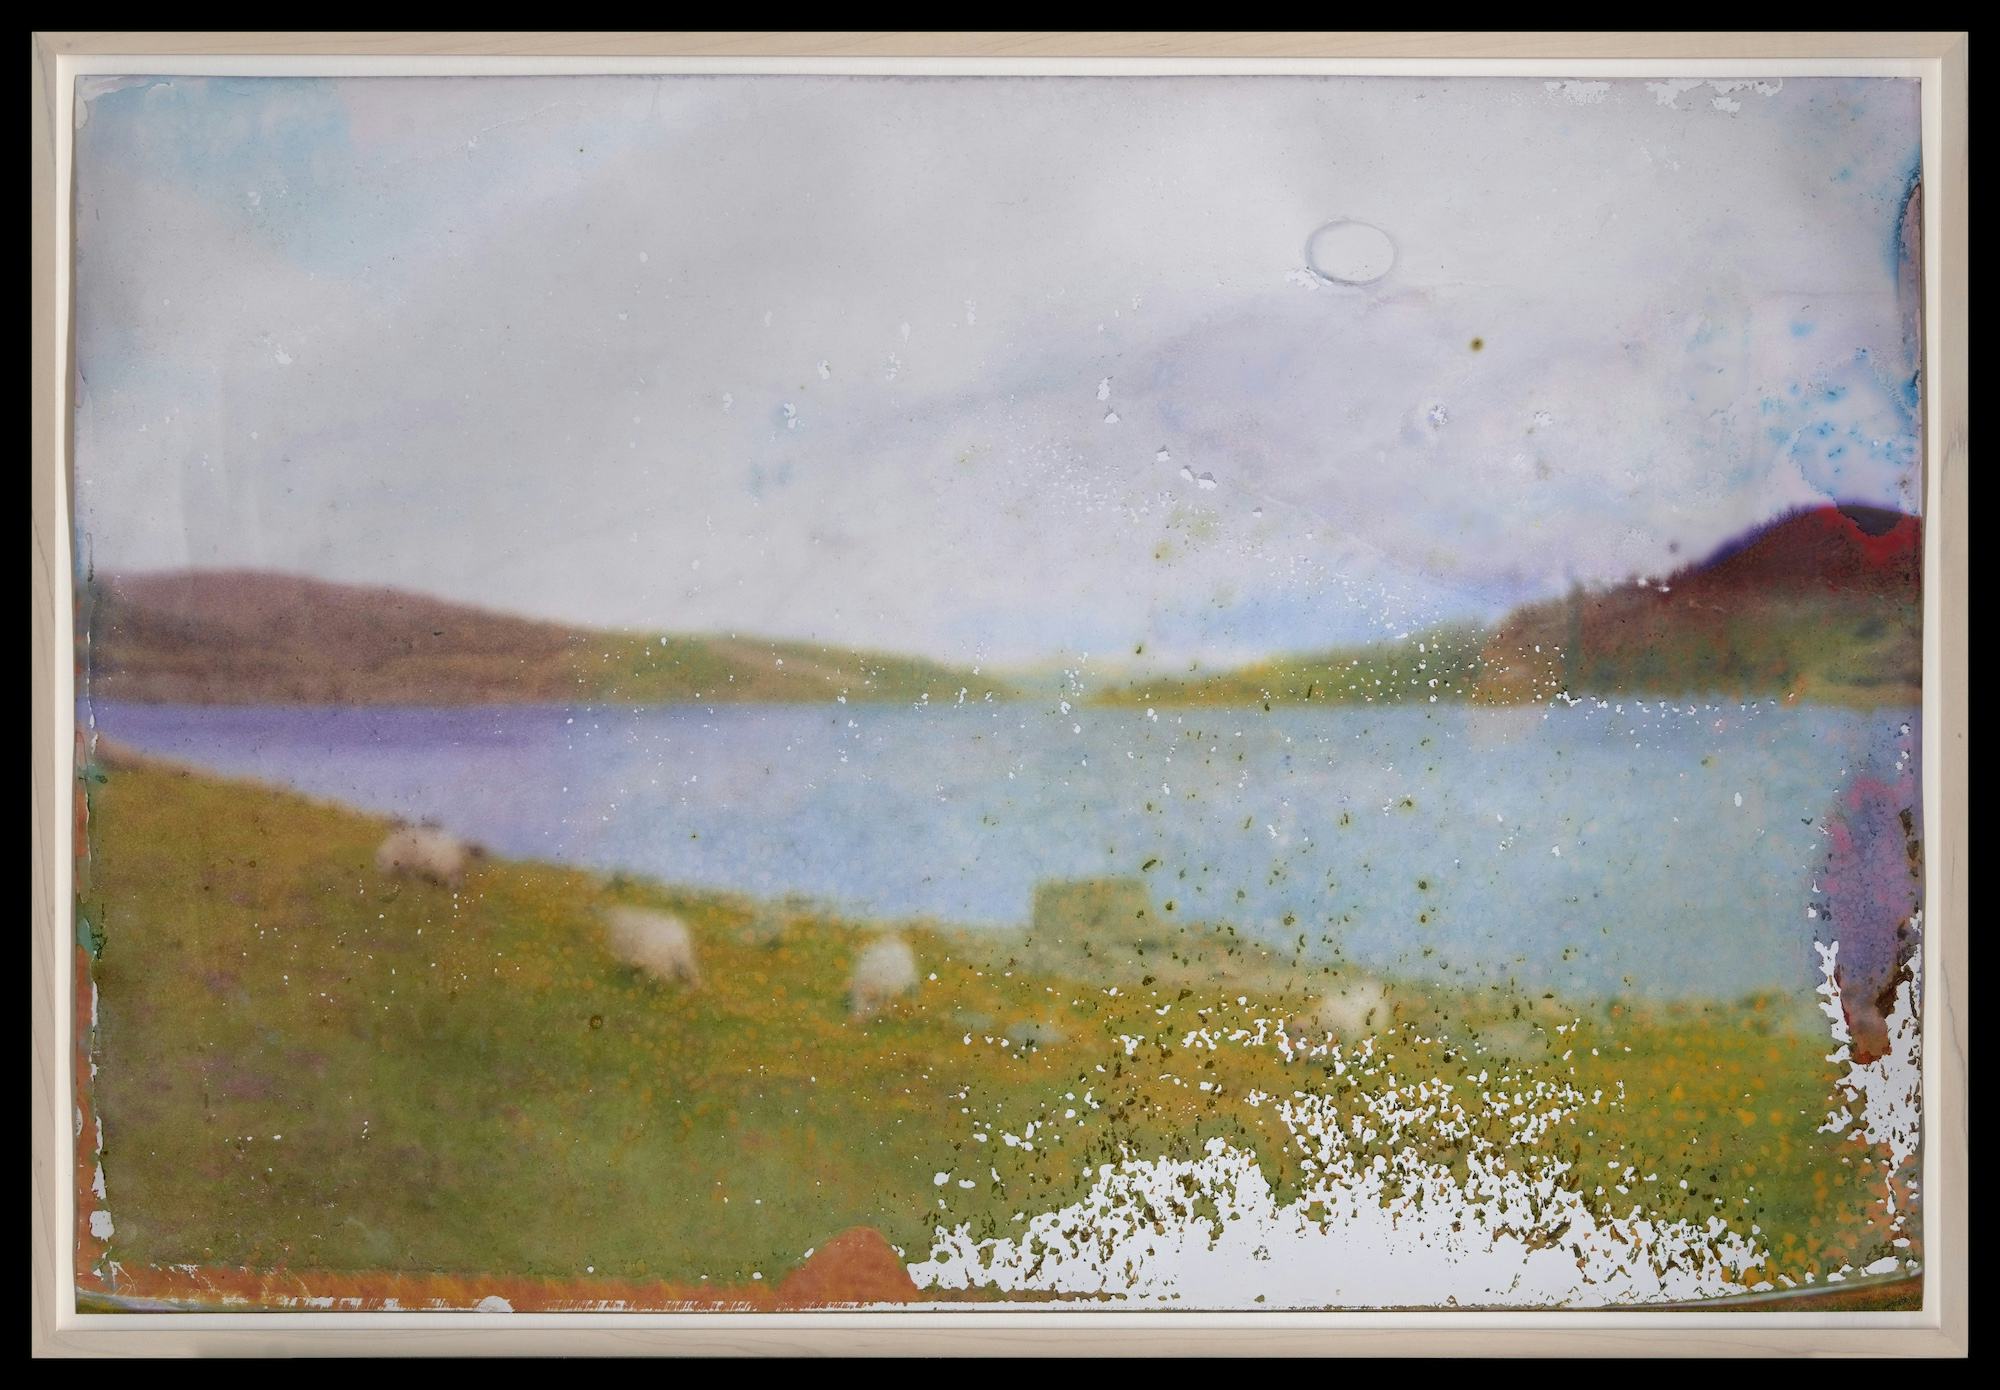 A landscape depicting lake and mountains. (The print is blurred on purpose.)